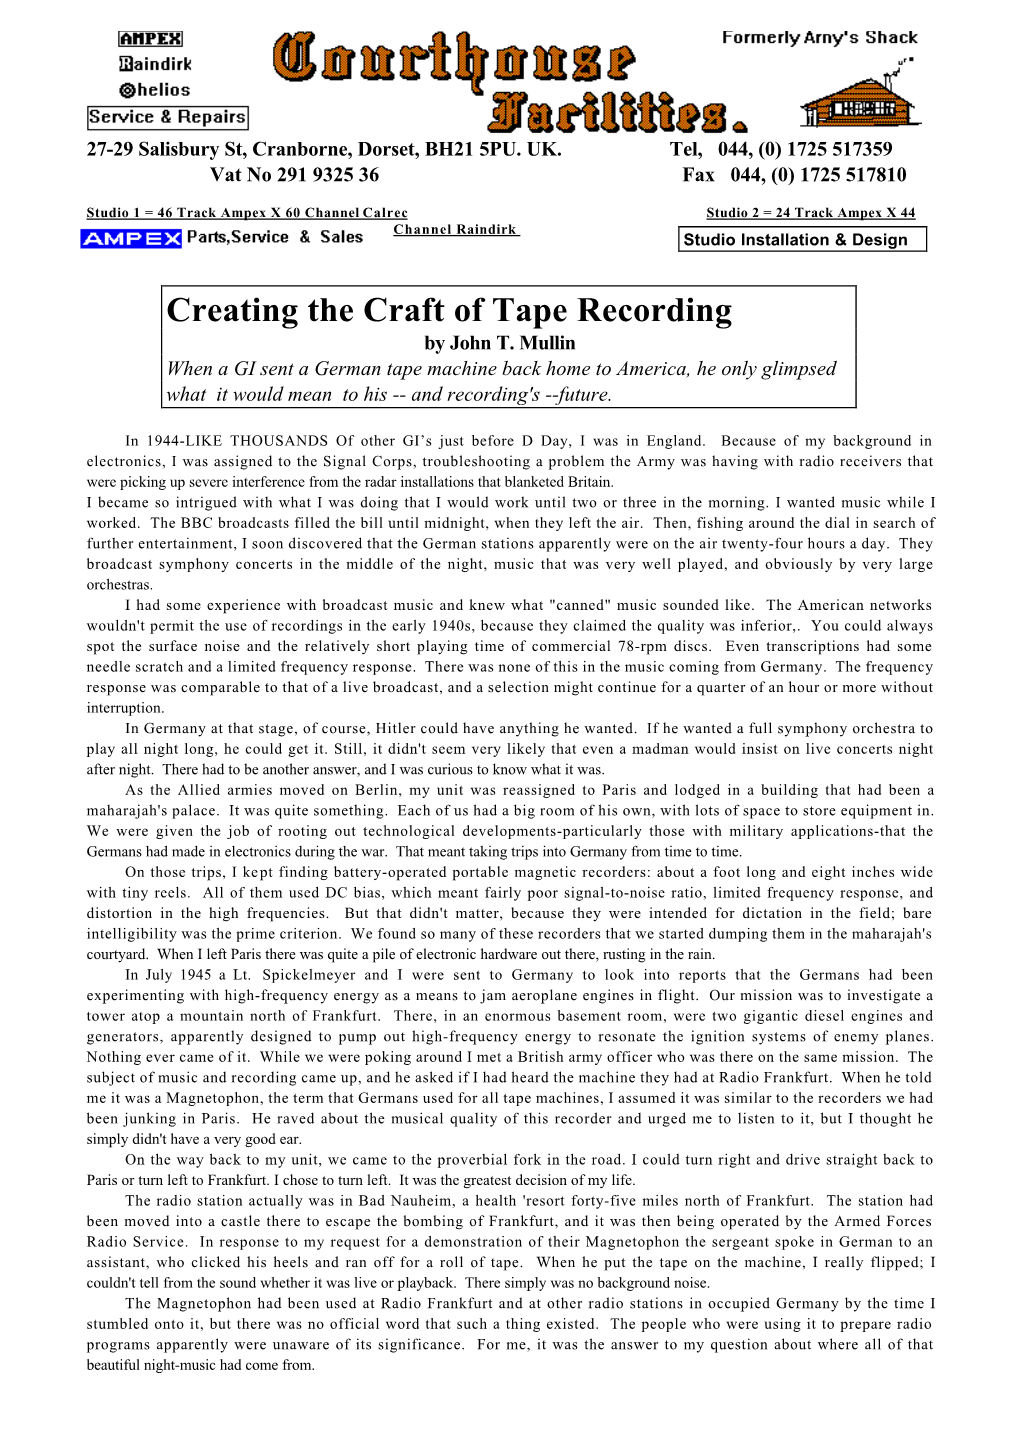 Creating the Craft of Tape Recording by John T